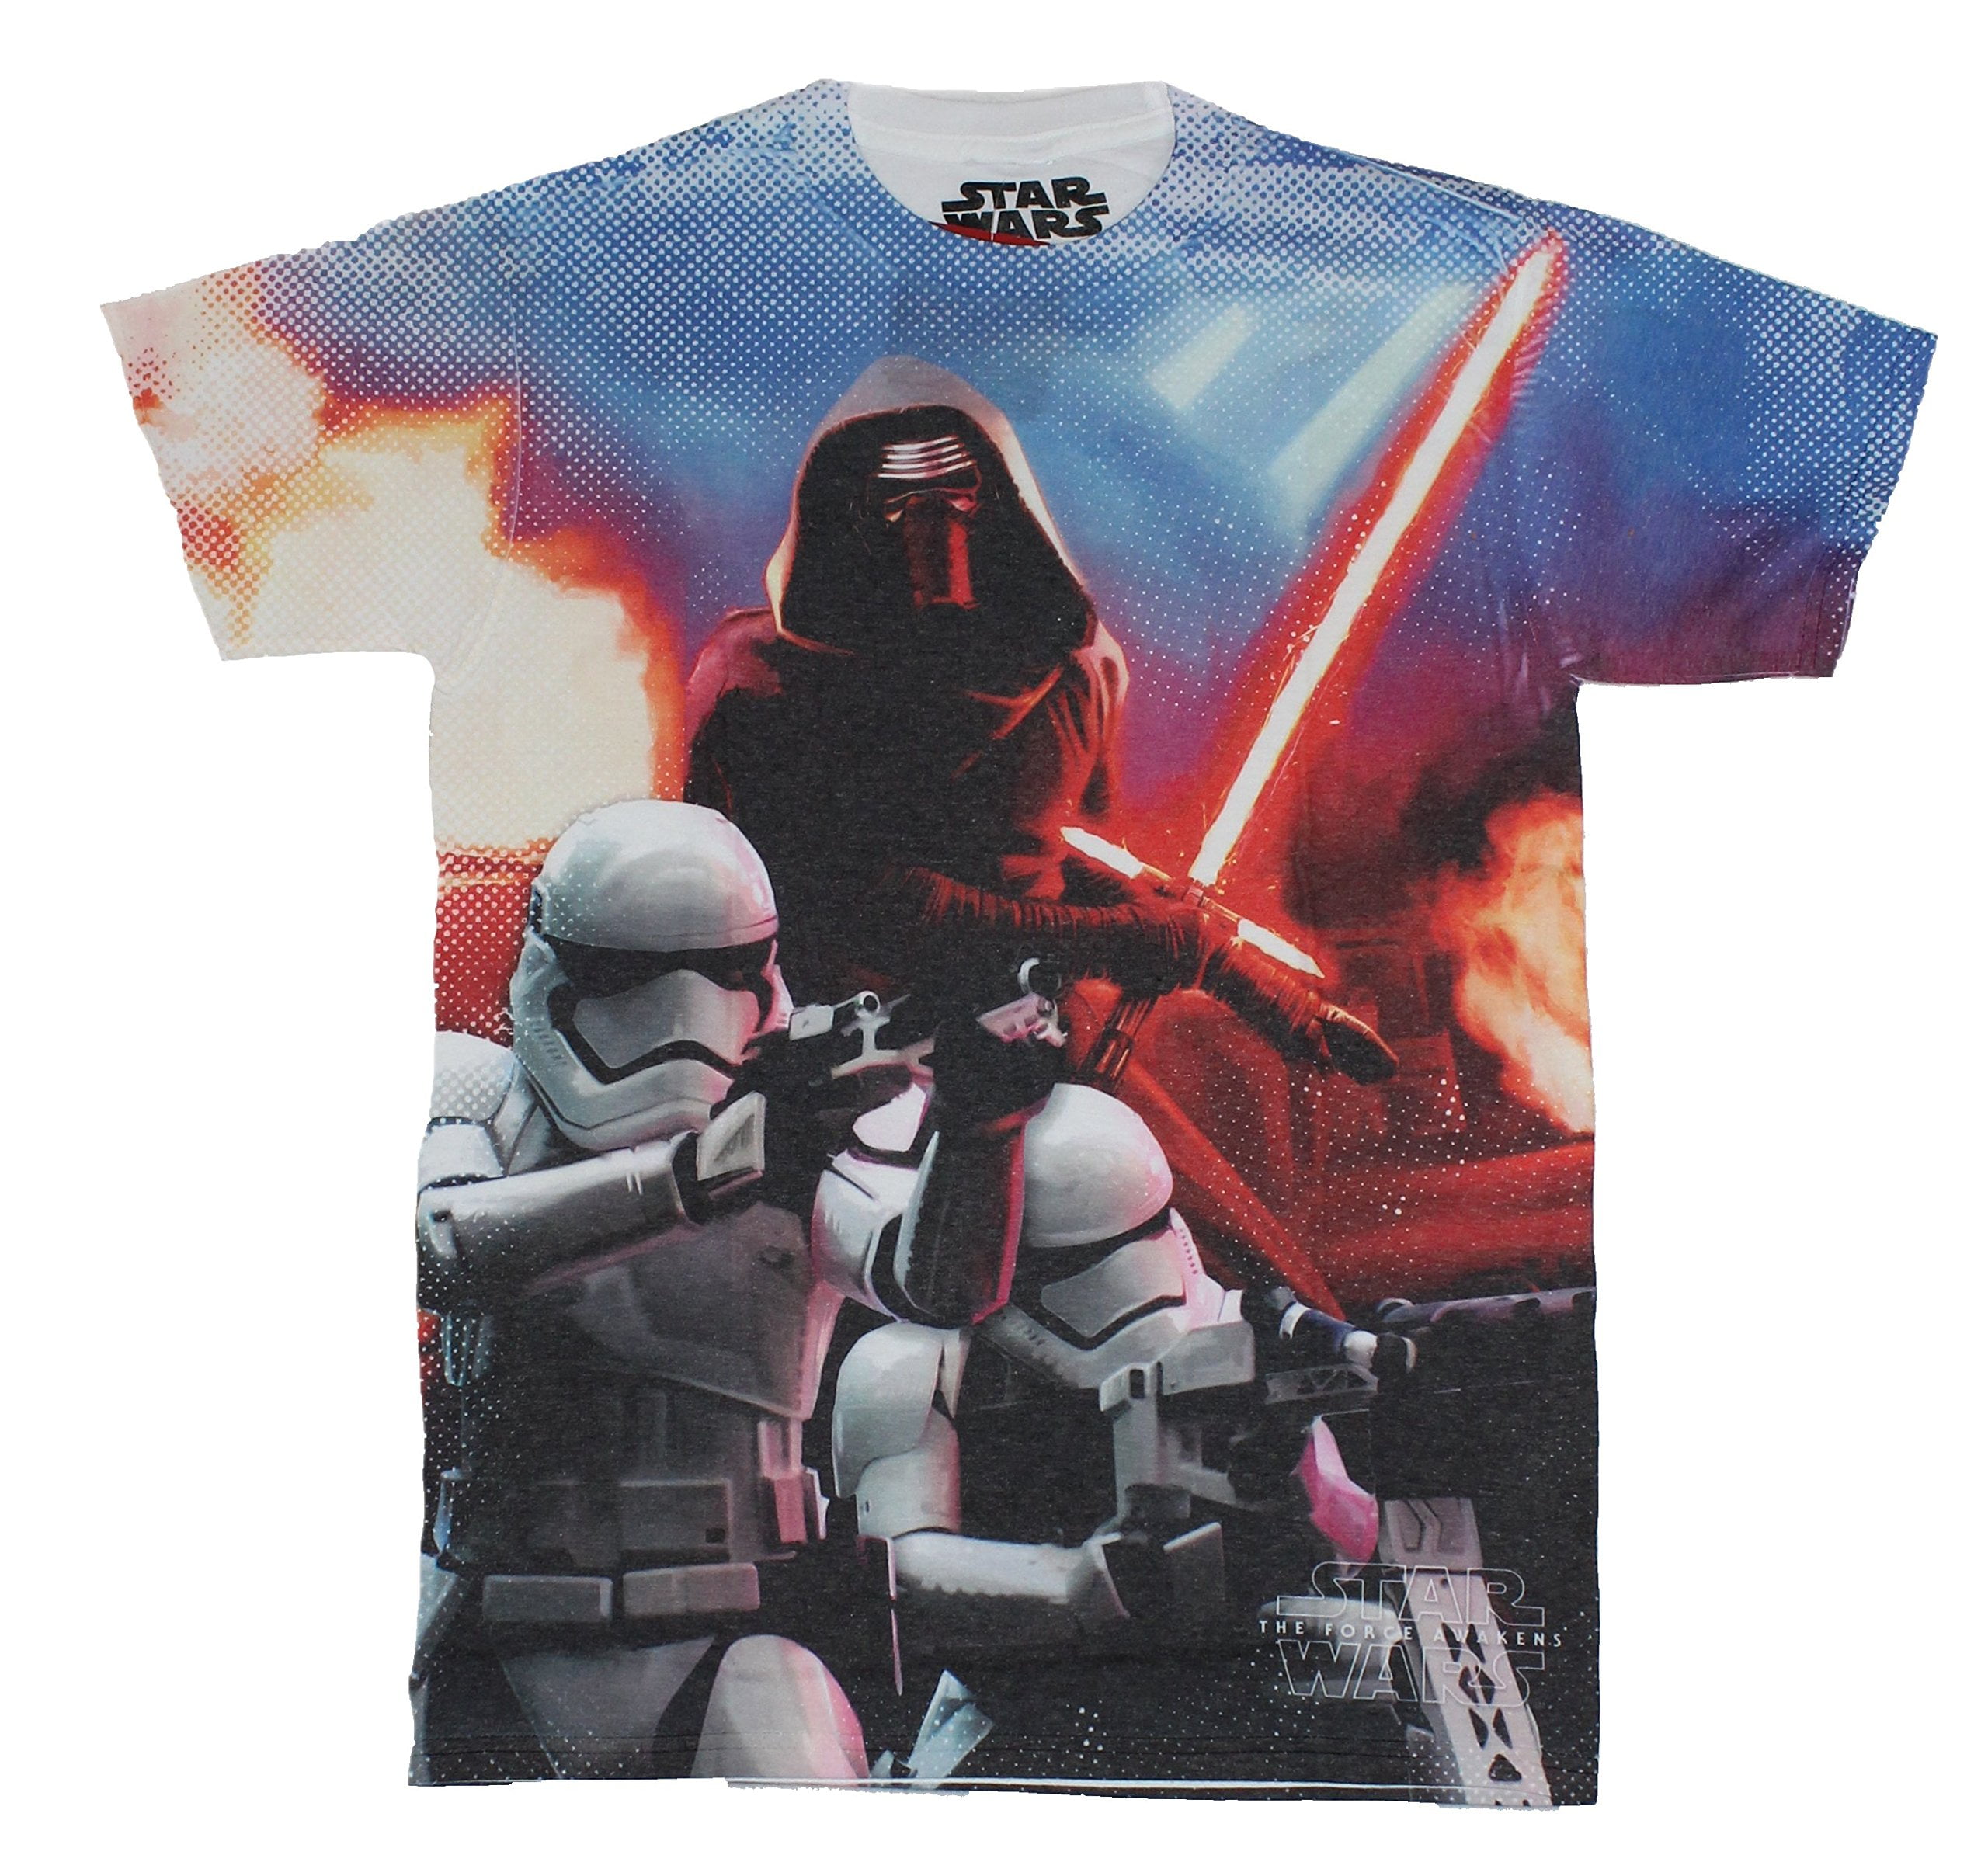 T-Shirt Kylo Ren  Sublimation Print-NEW Star Wars L The Force Awakens 